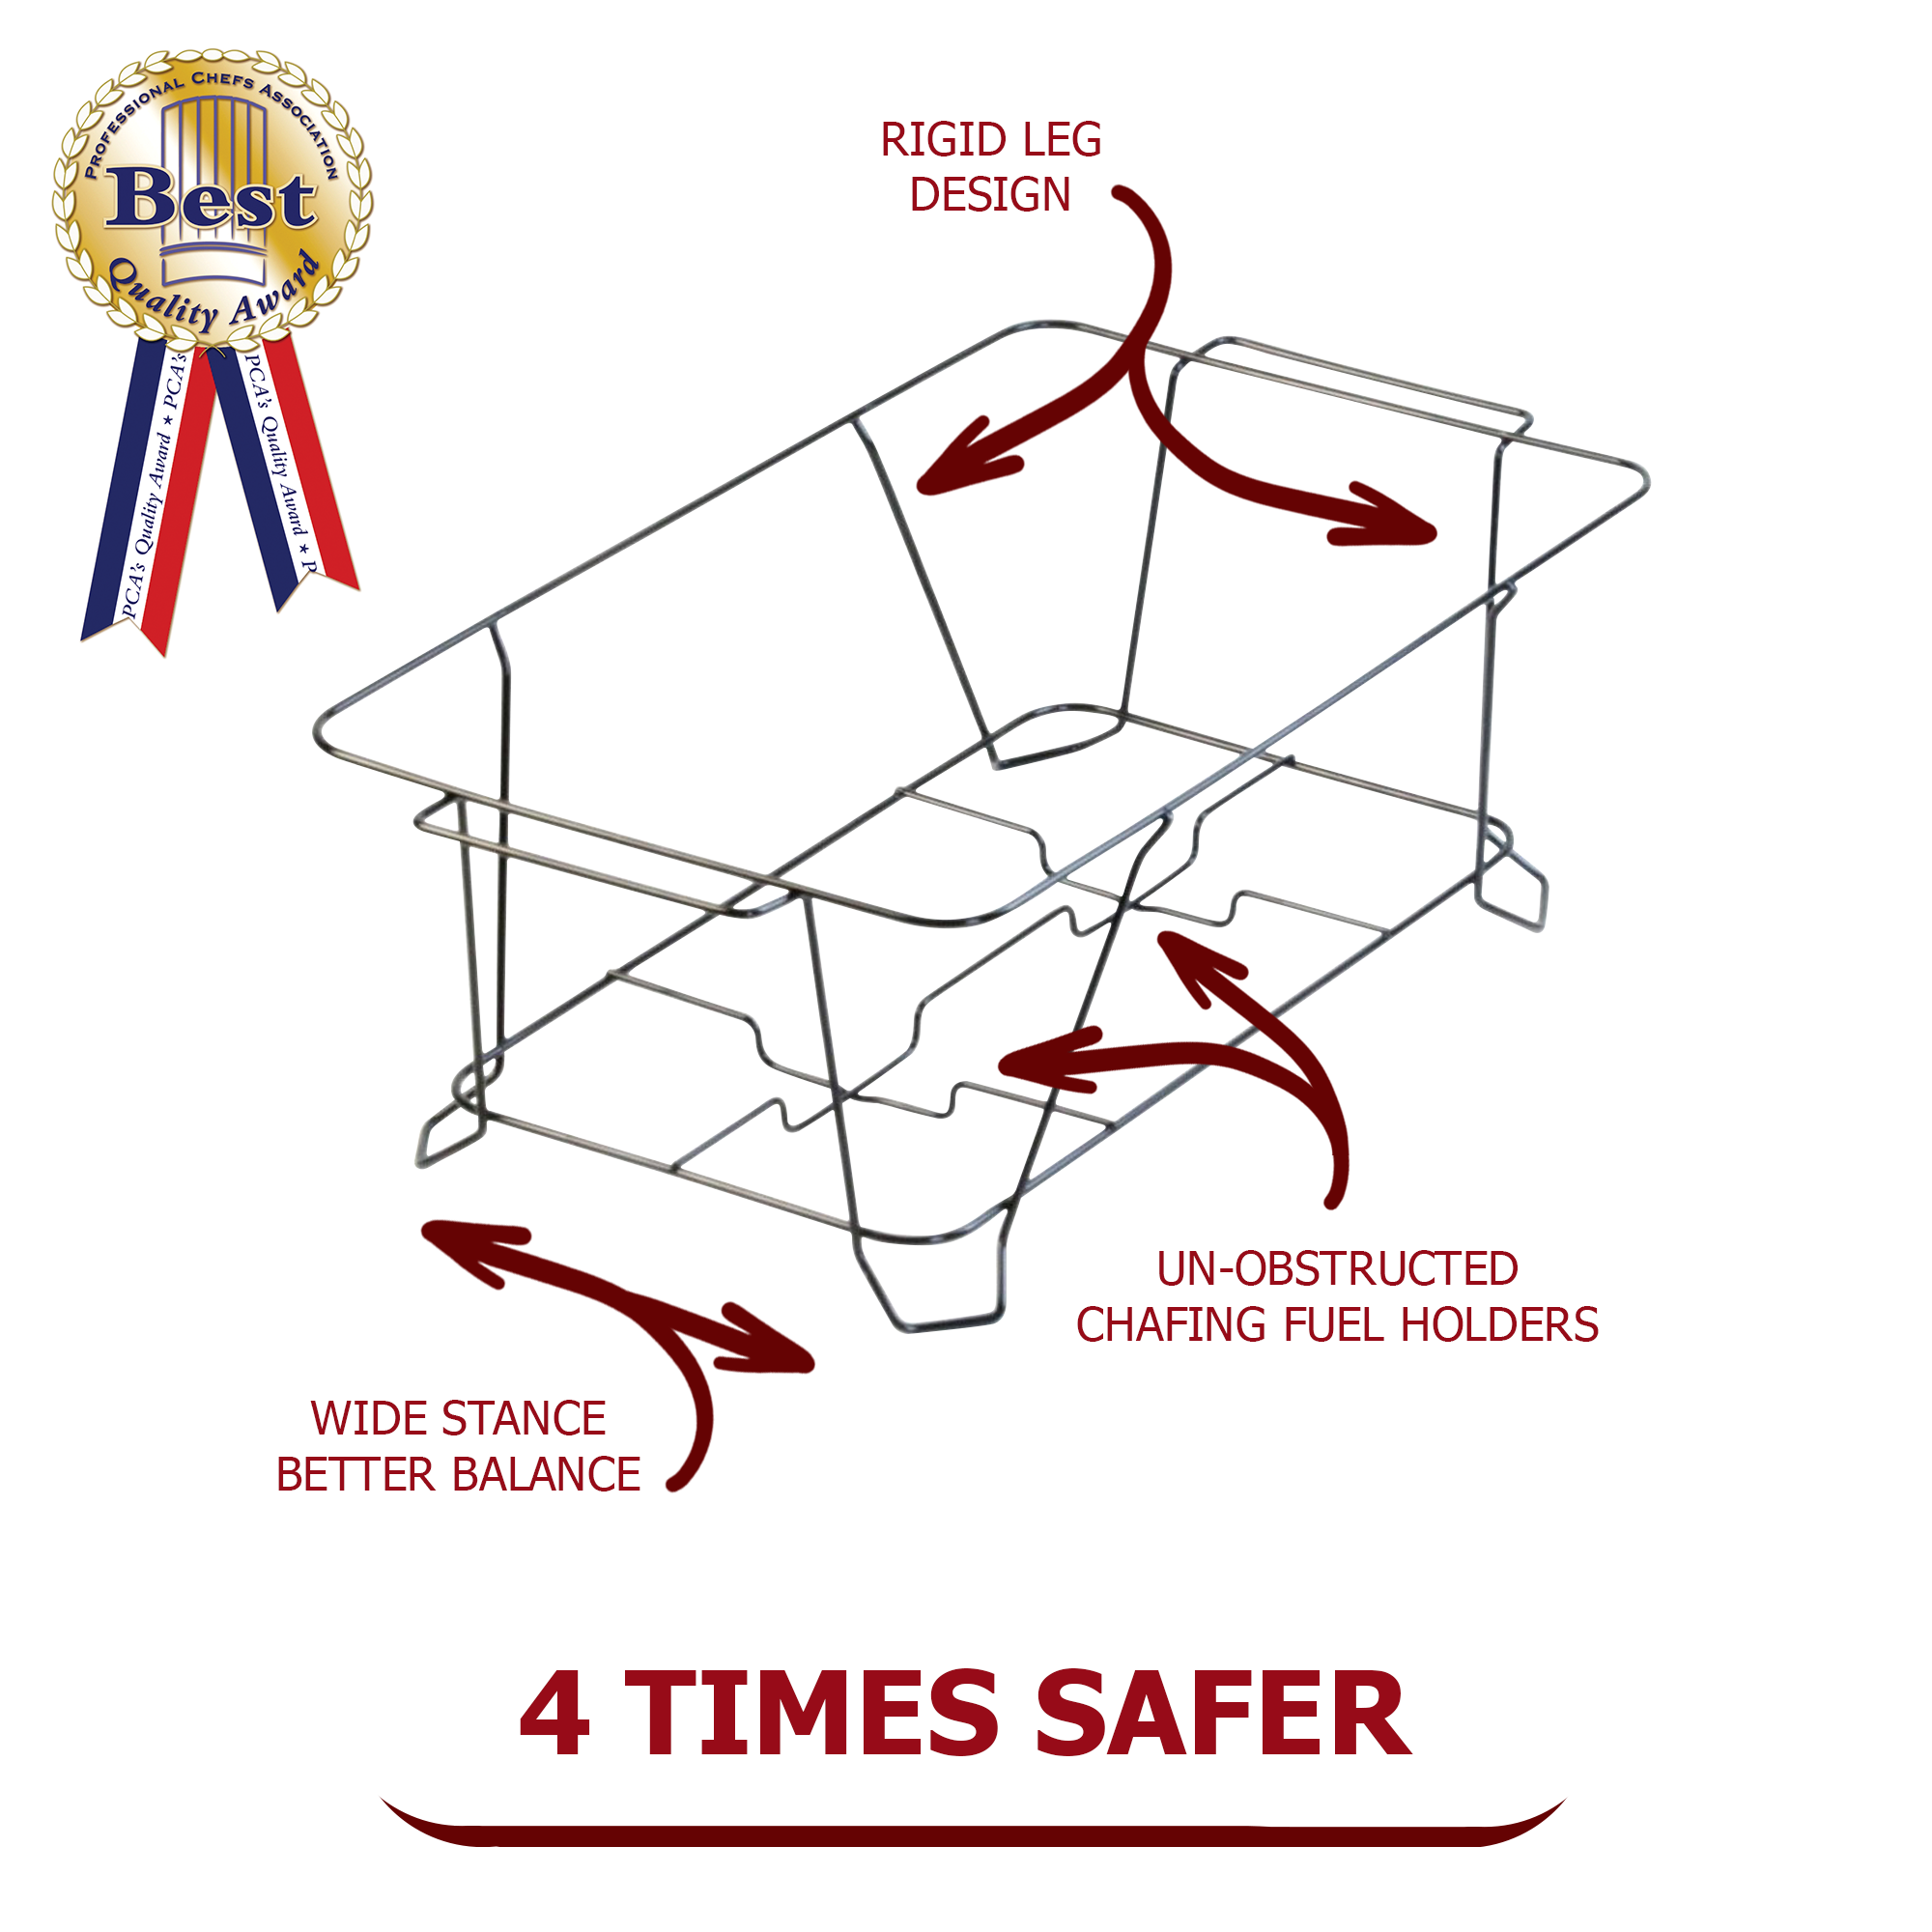 Skorr Wire Buffet Stand - FREE SHIPPING !